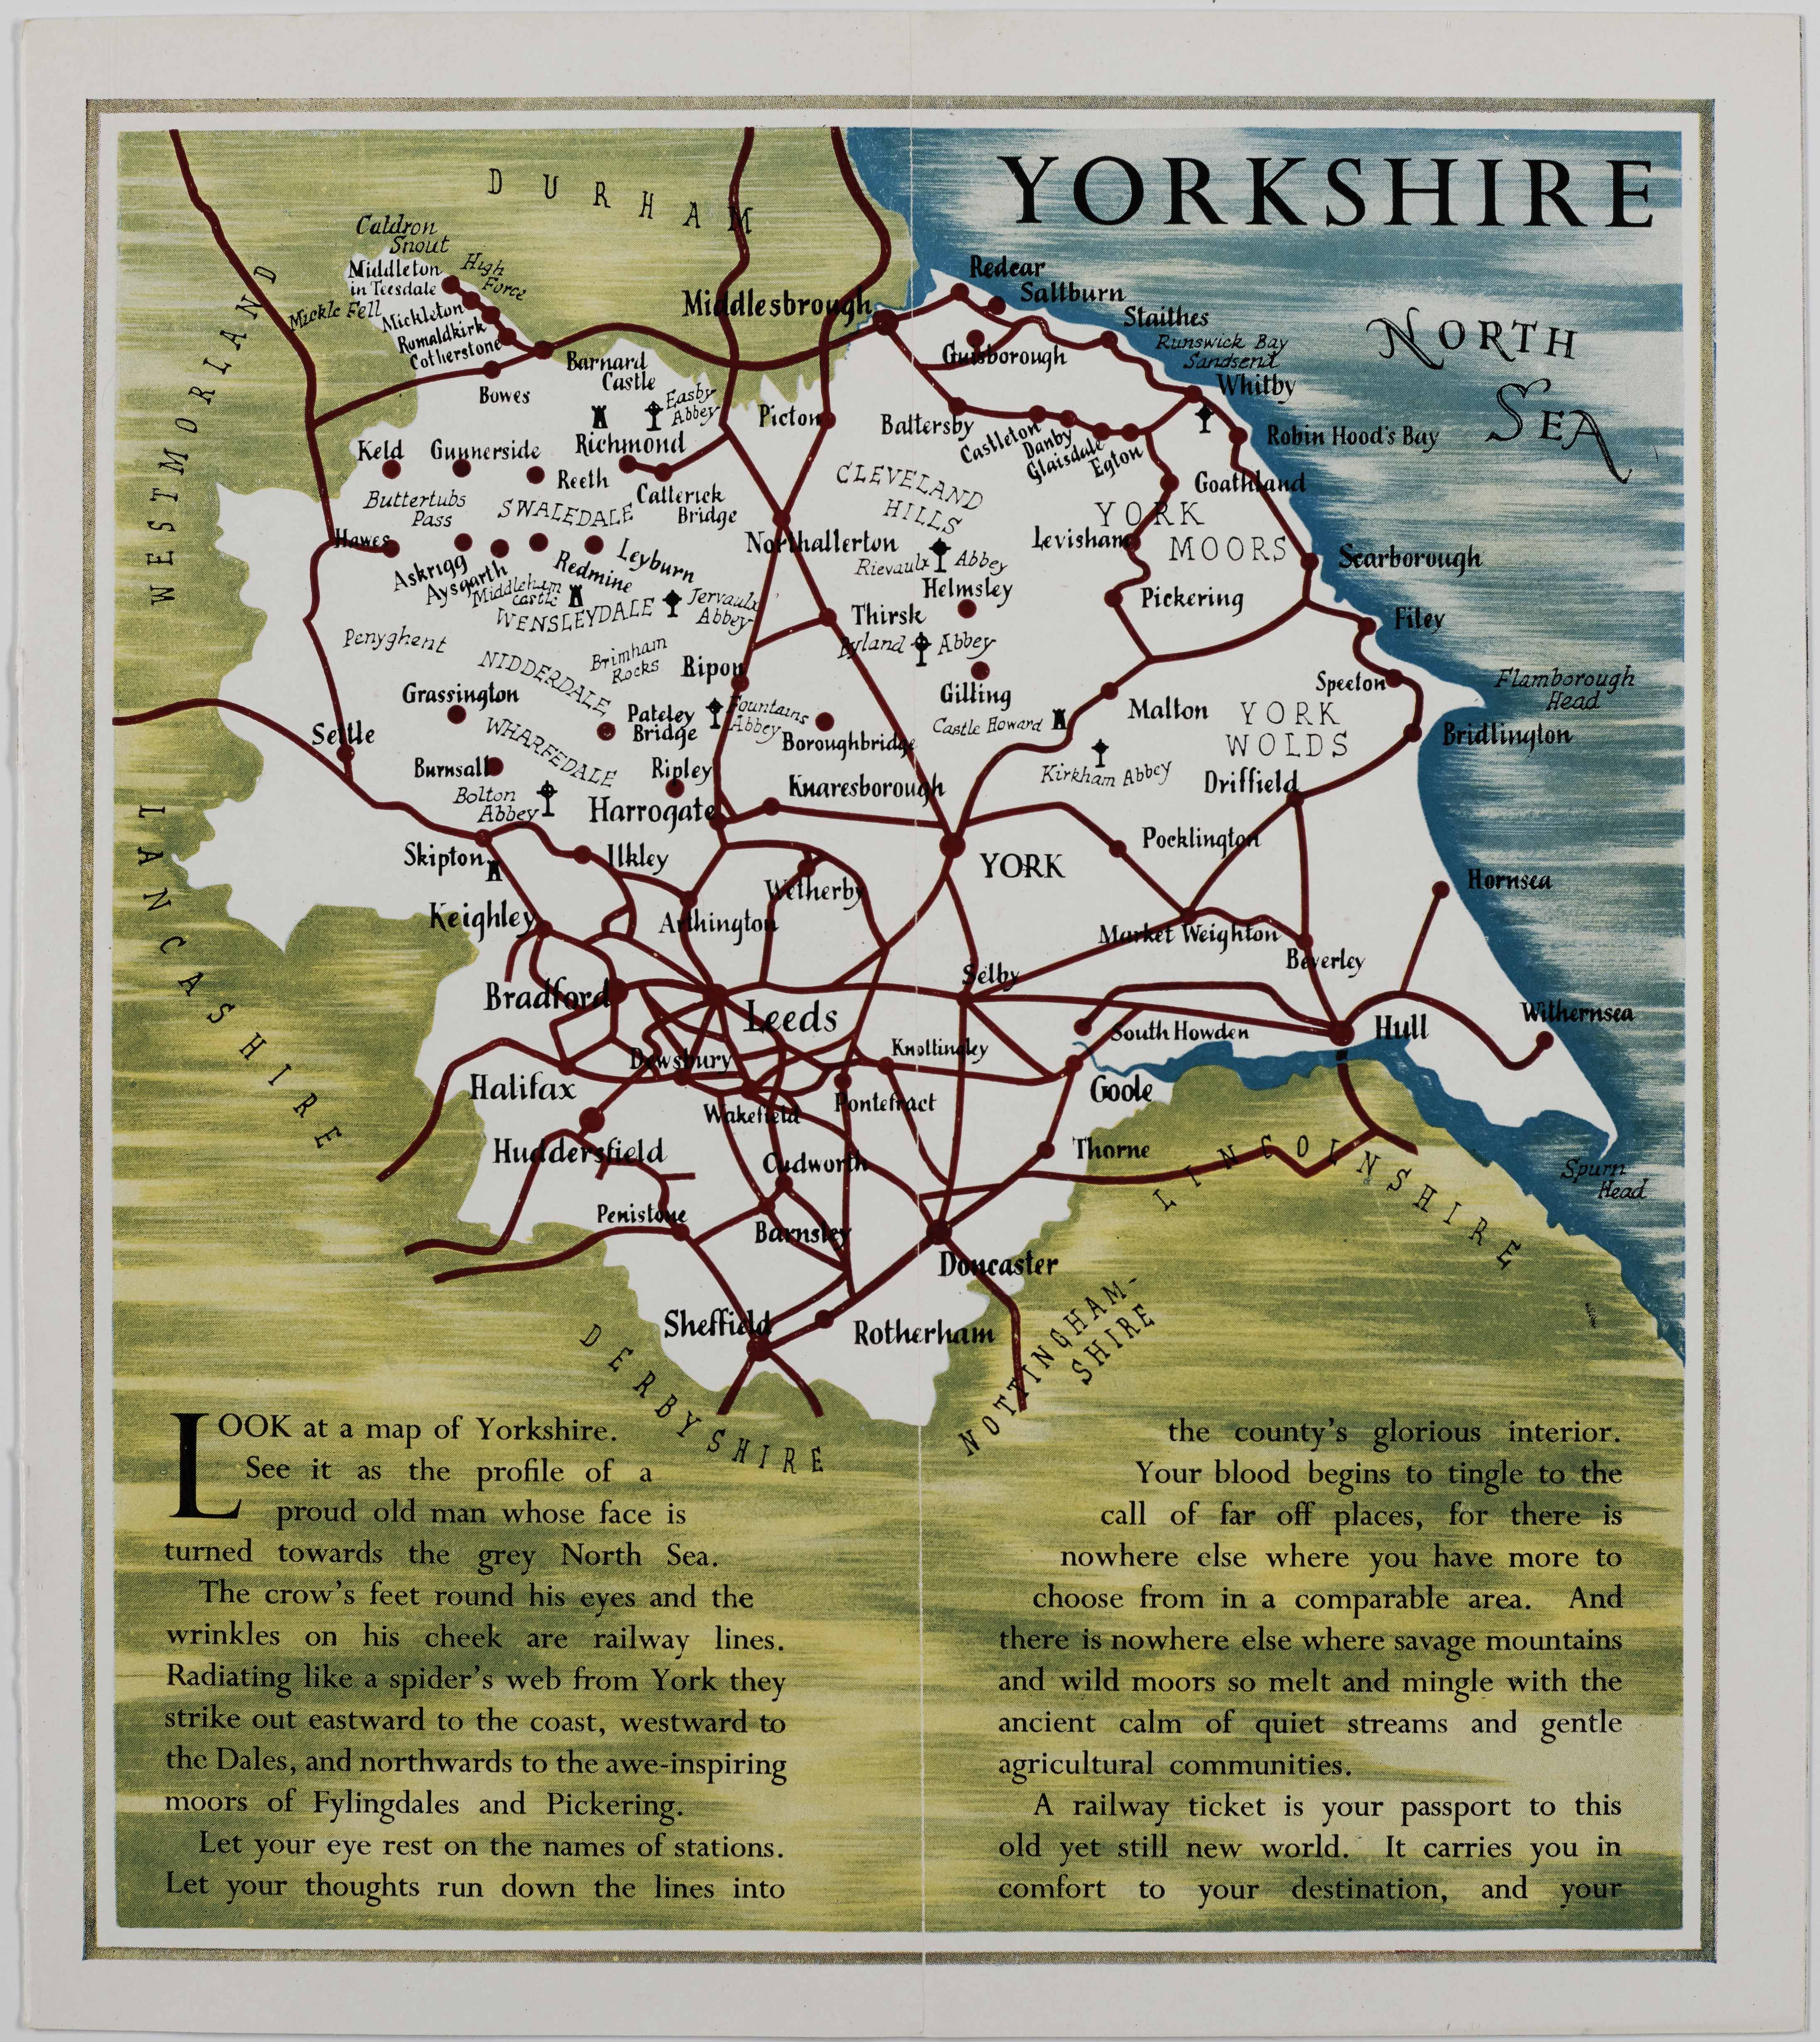 The British Railways Guide to Yorkshire, circa 1950s, quoted above